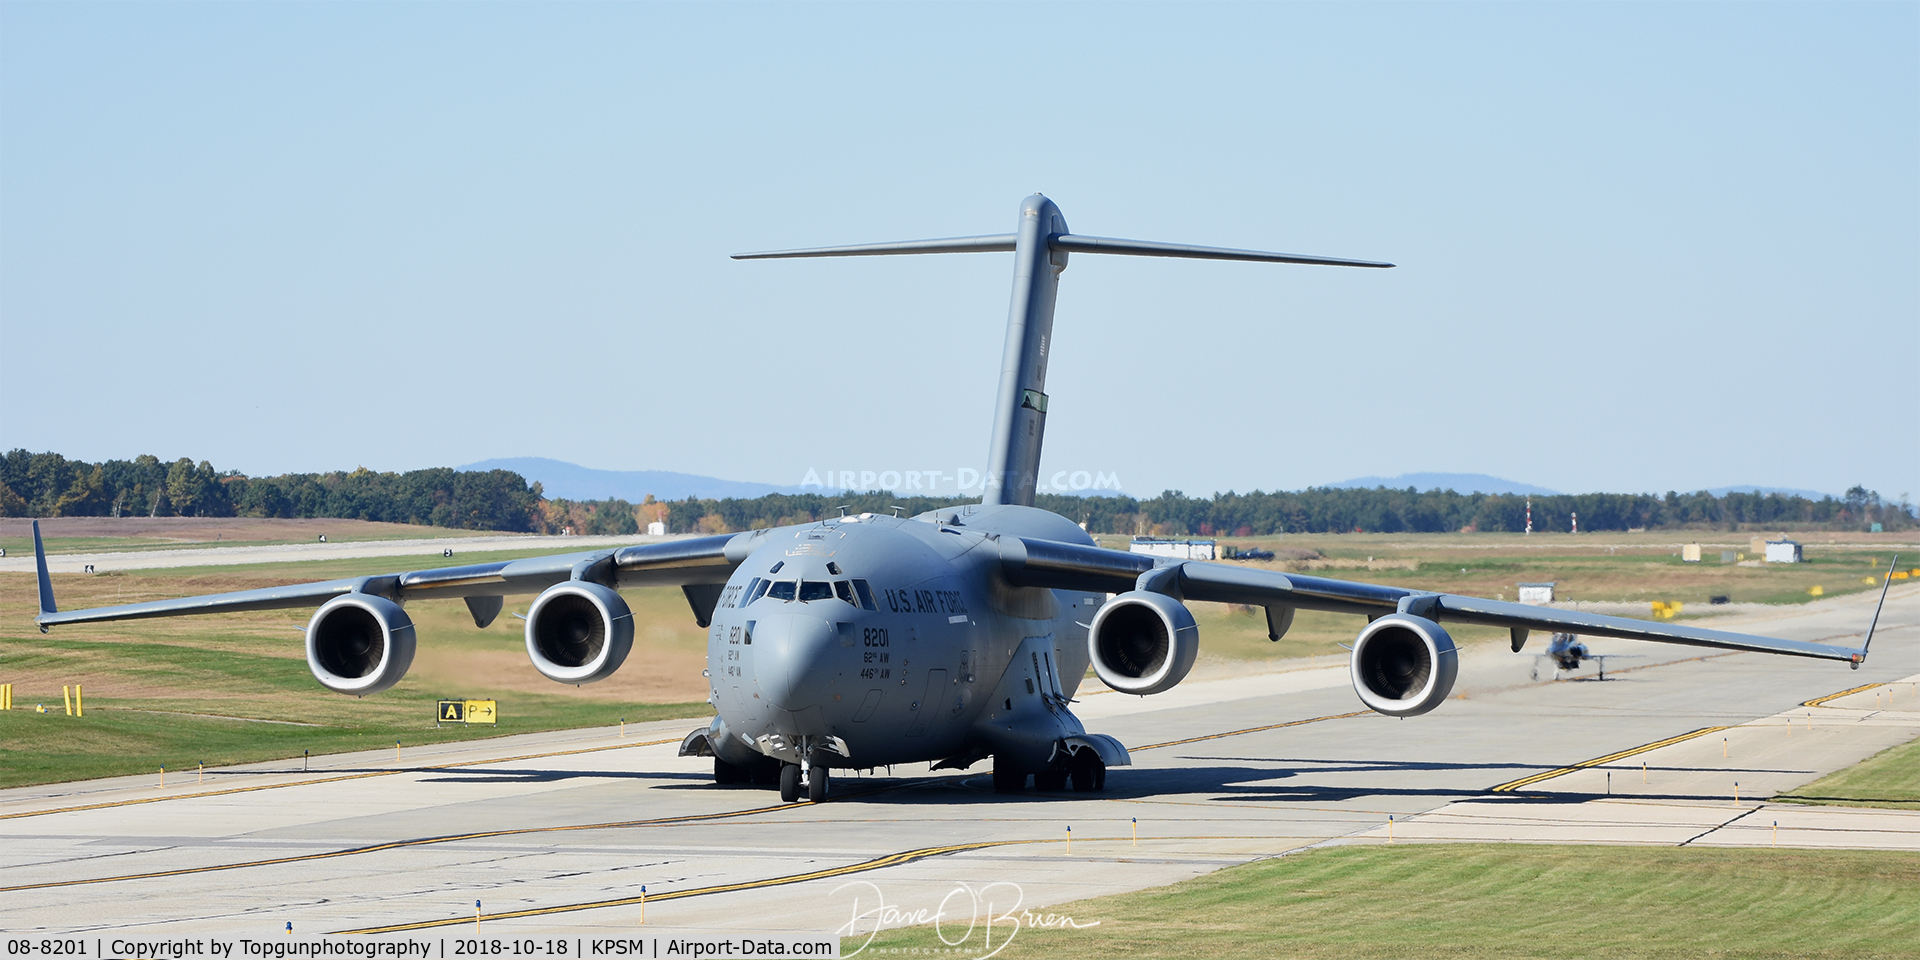 08-8201, 2008 Boeing C-17A Globemaster III C/N P-201, REACH773 taxing to the active